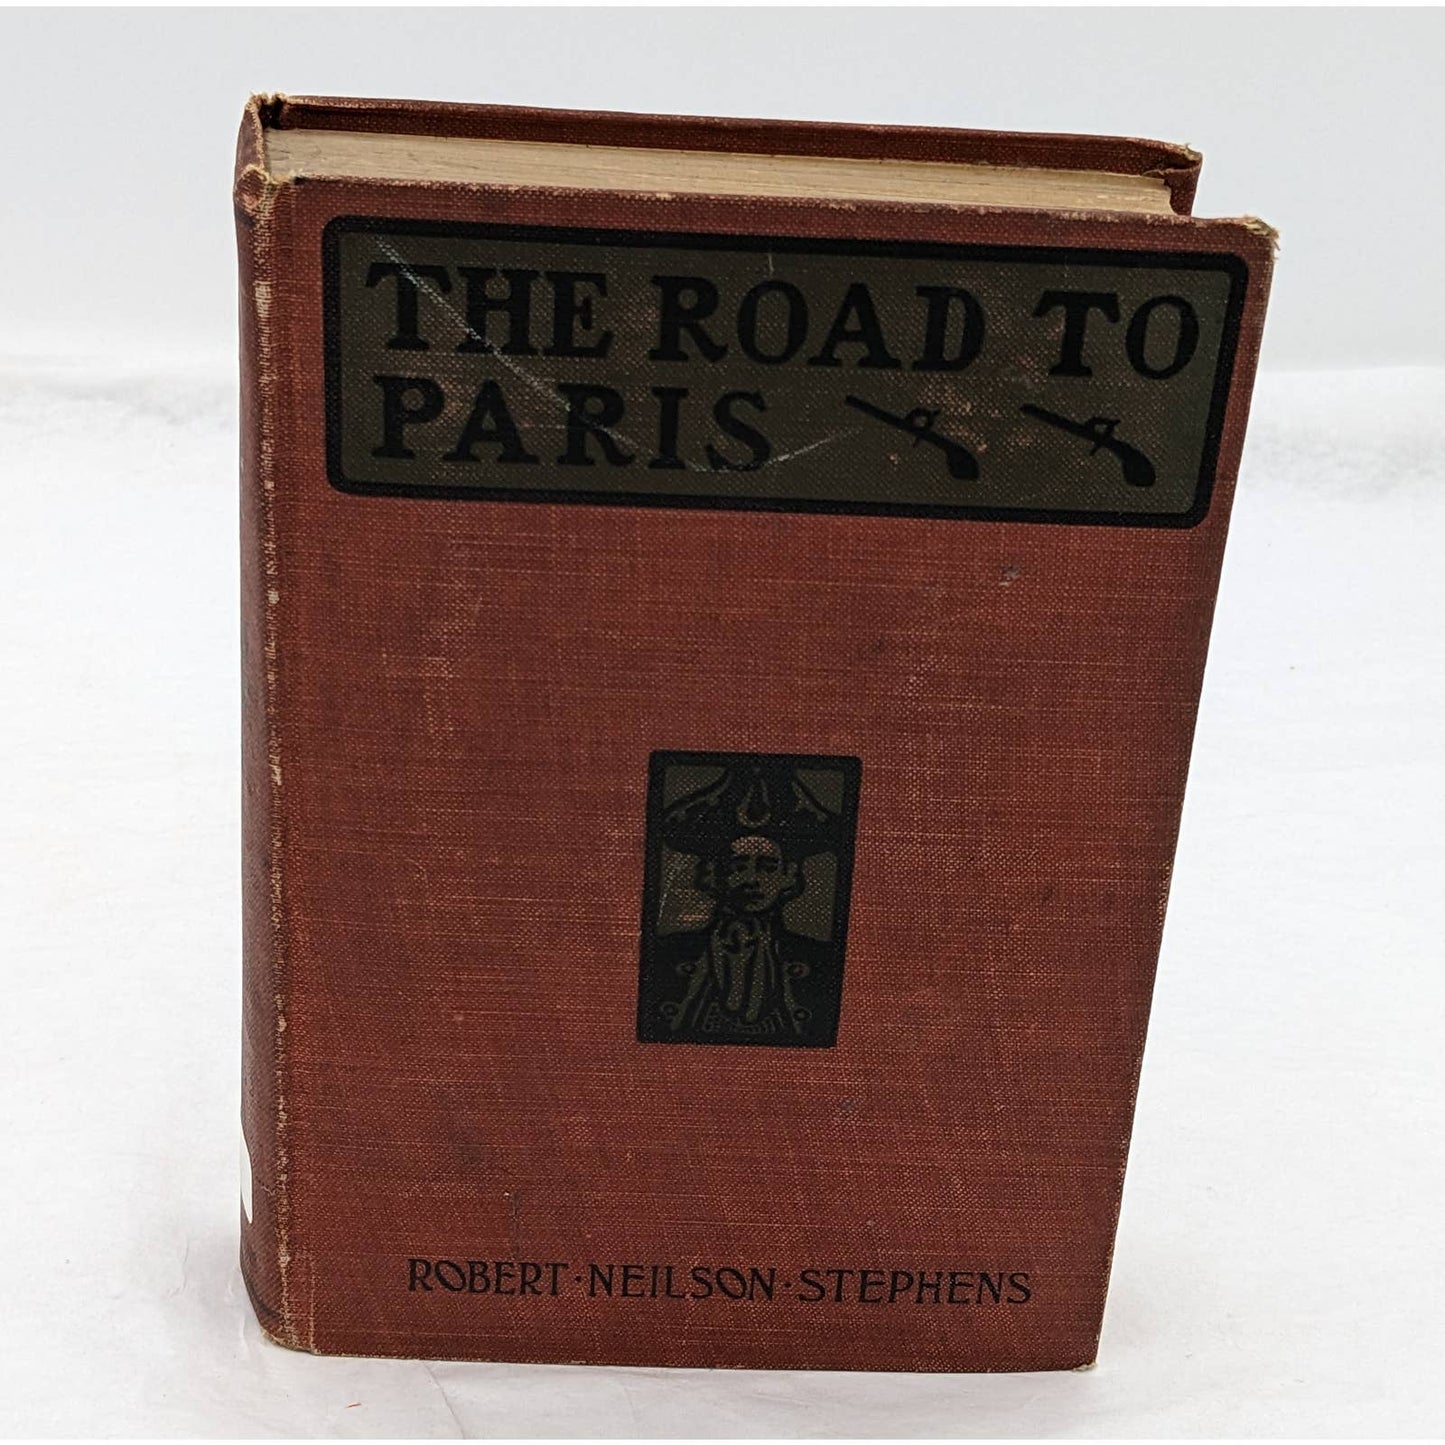 The Road To Paris A Story Of Adventure By Robert Neilson Stephens 1901